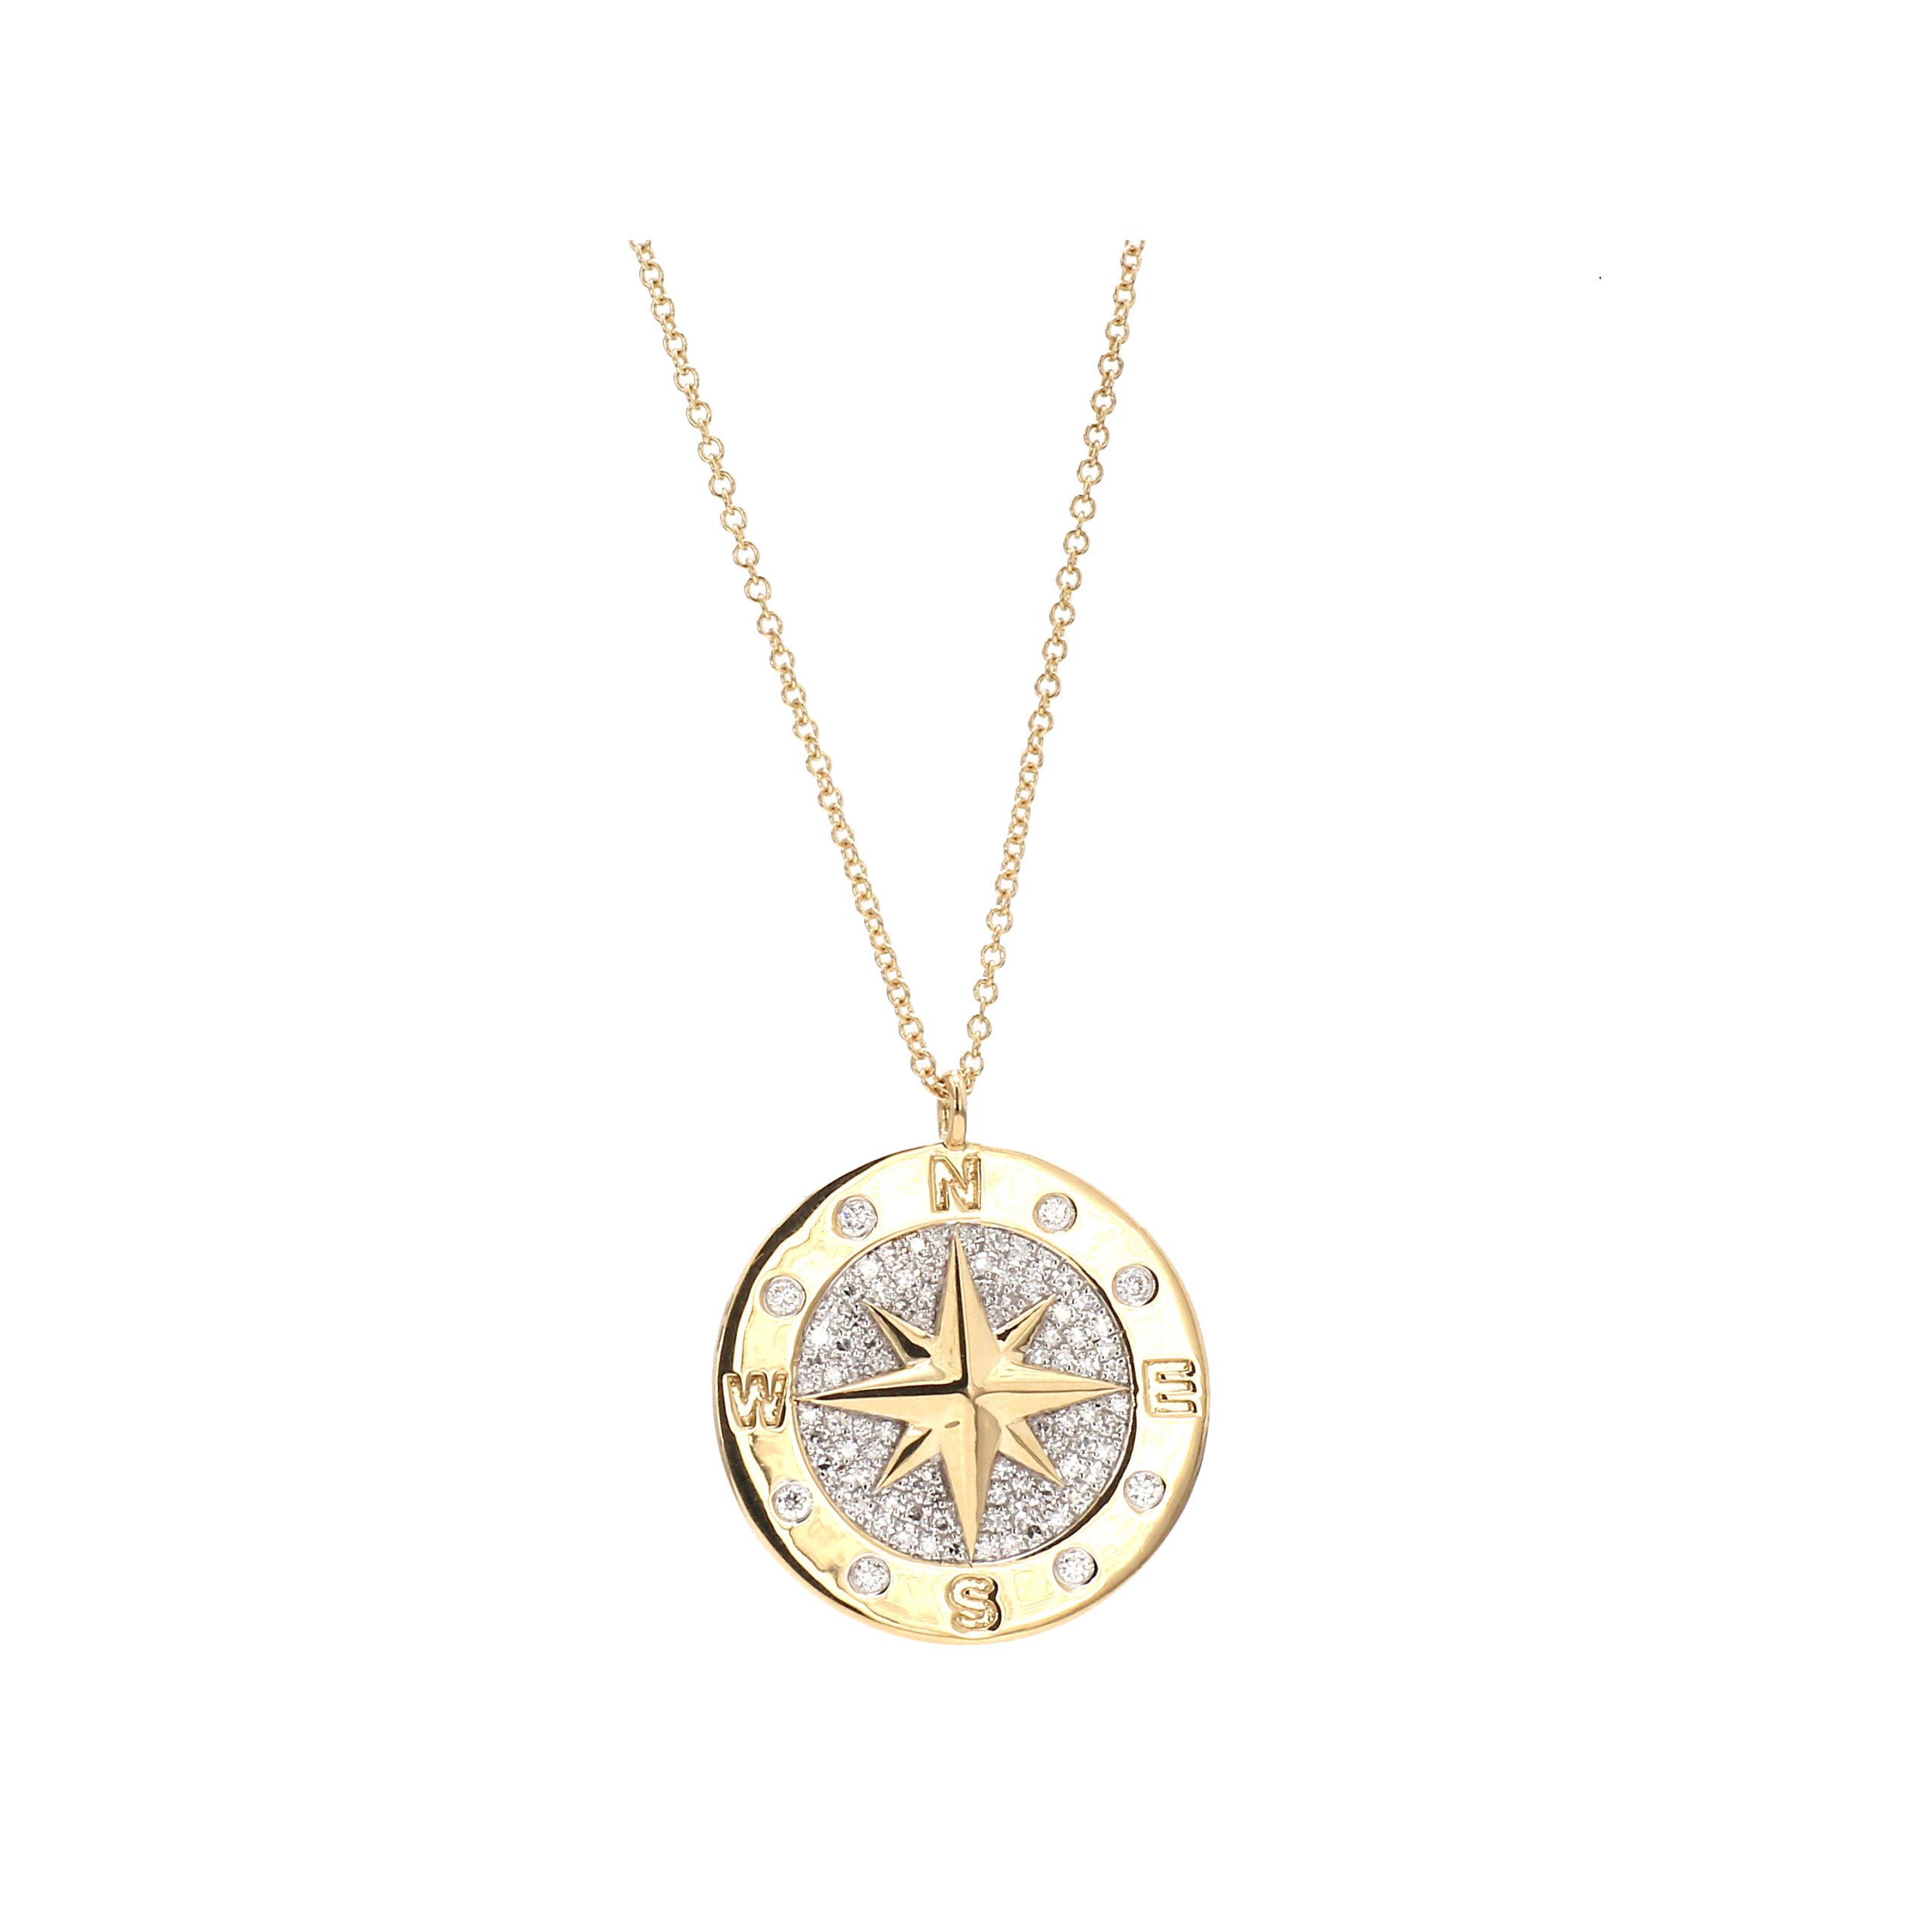 Engraved Compass Necklace with diamond - 14k Solid Gold - Oak & Luna